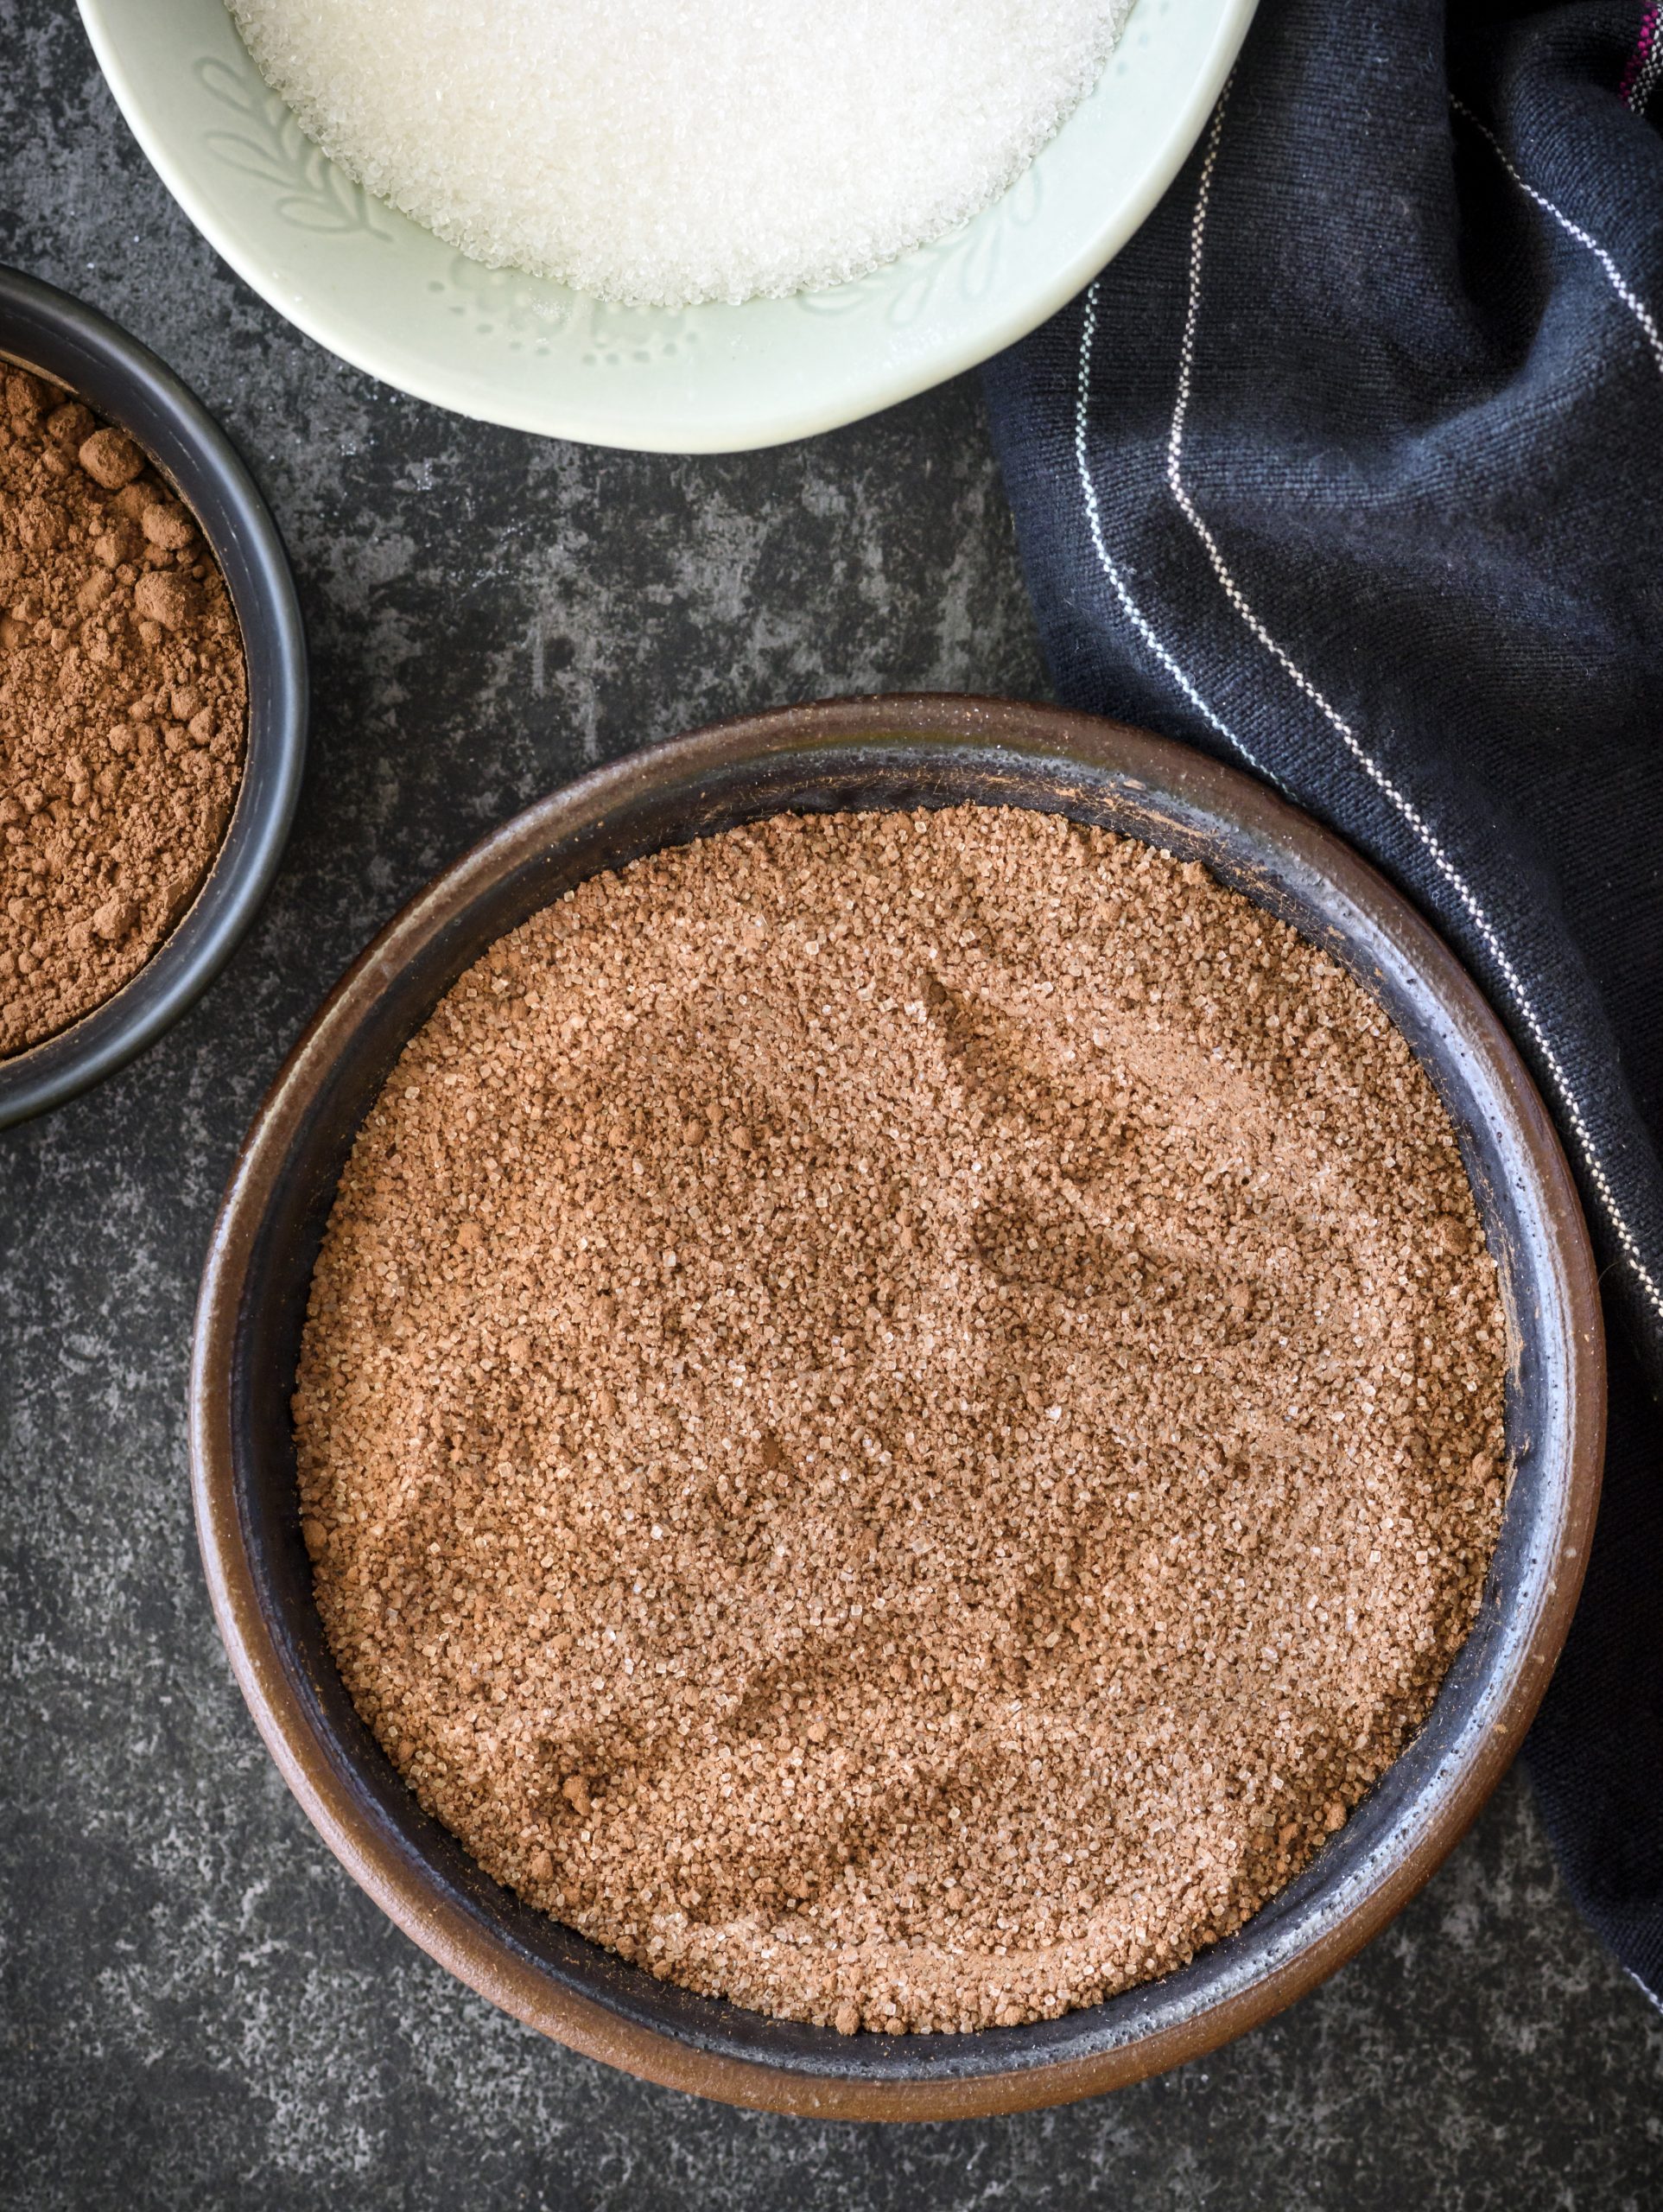 In a mixing bowl, stir together the flour, ¼ cup of the cocoa powder, and ½ cup of the sugar. 